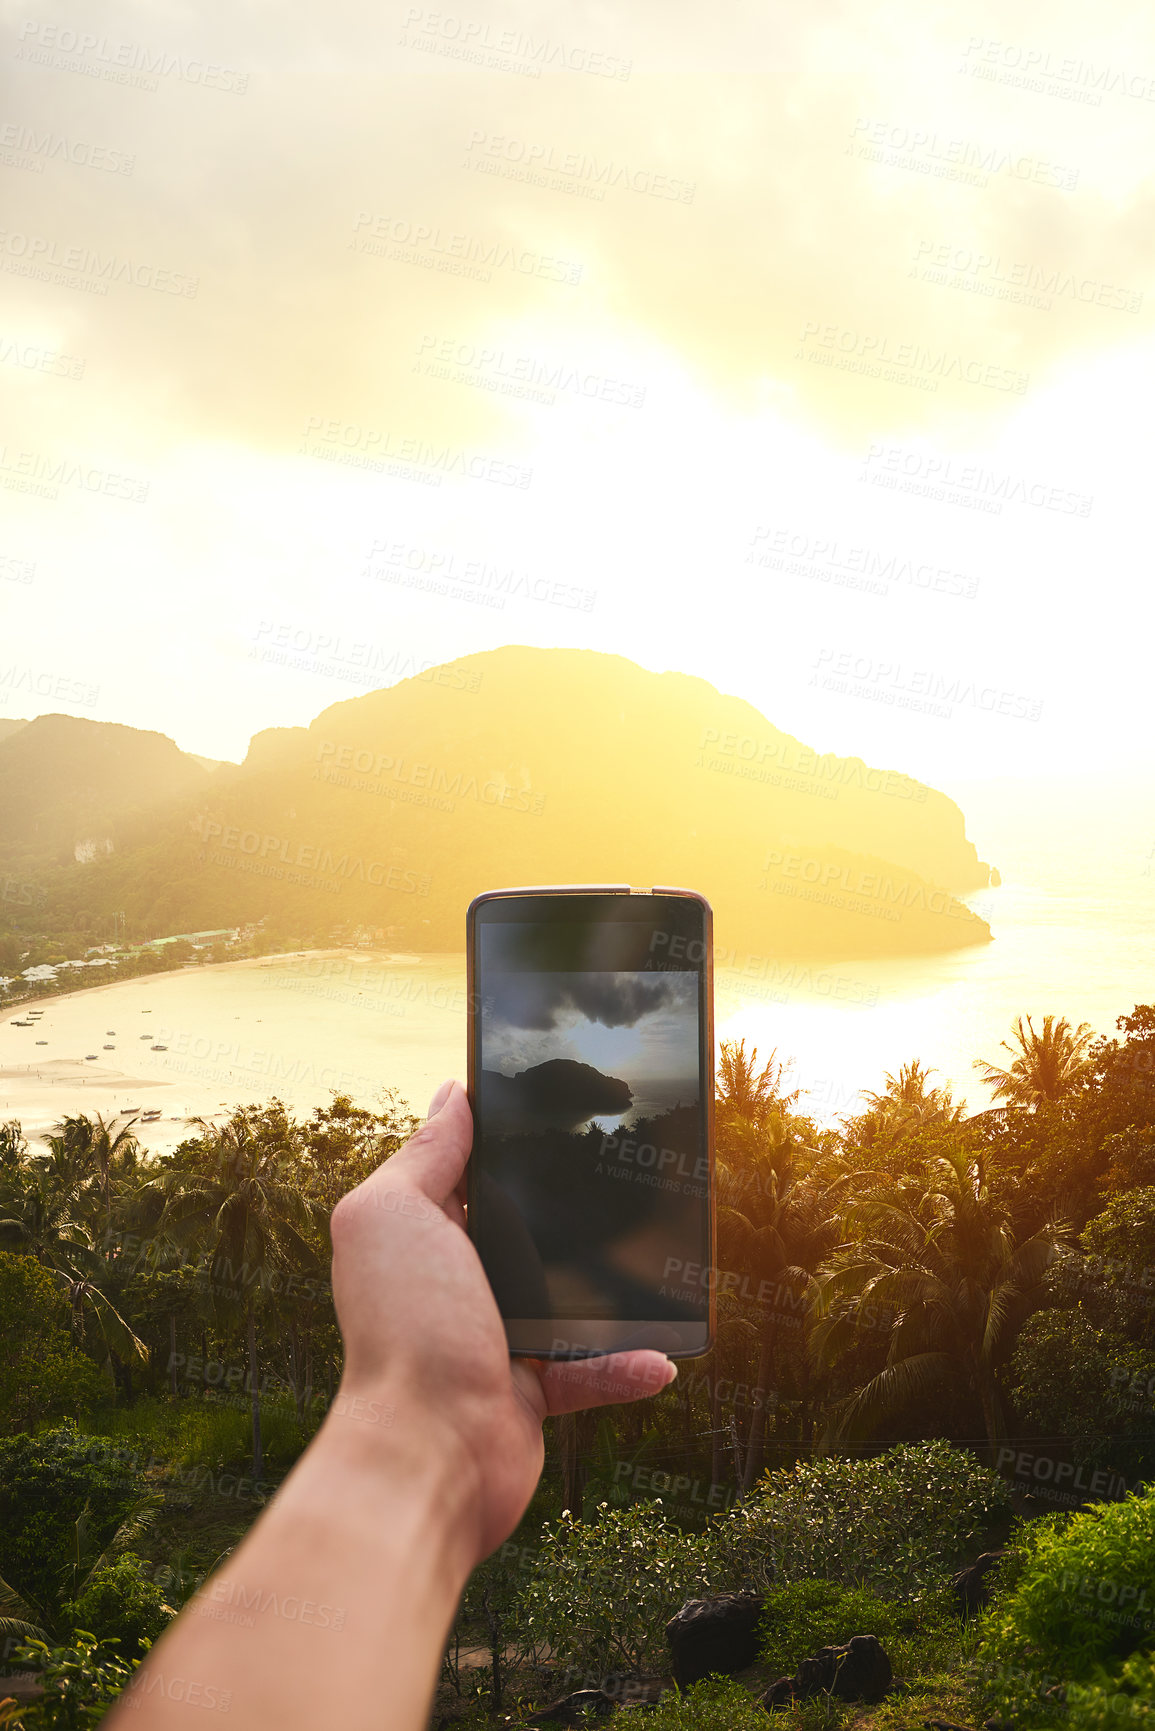 Buy stock photo Cropped shot of an unidentifiable tourist using a smartphone to photograph an island view